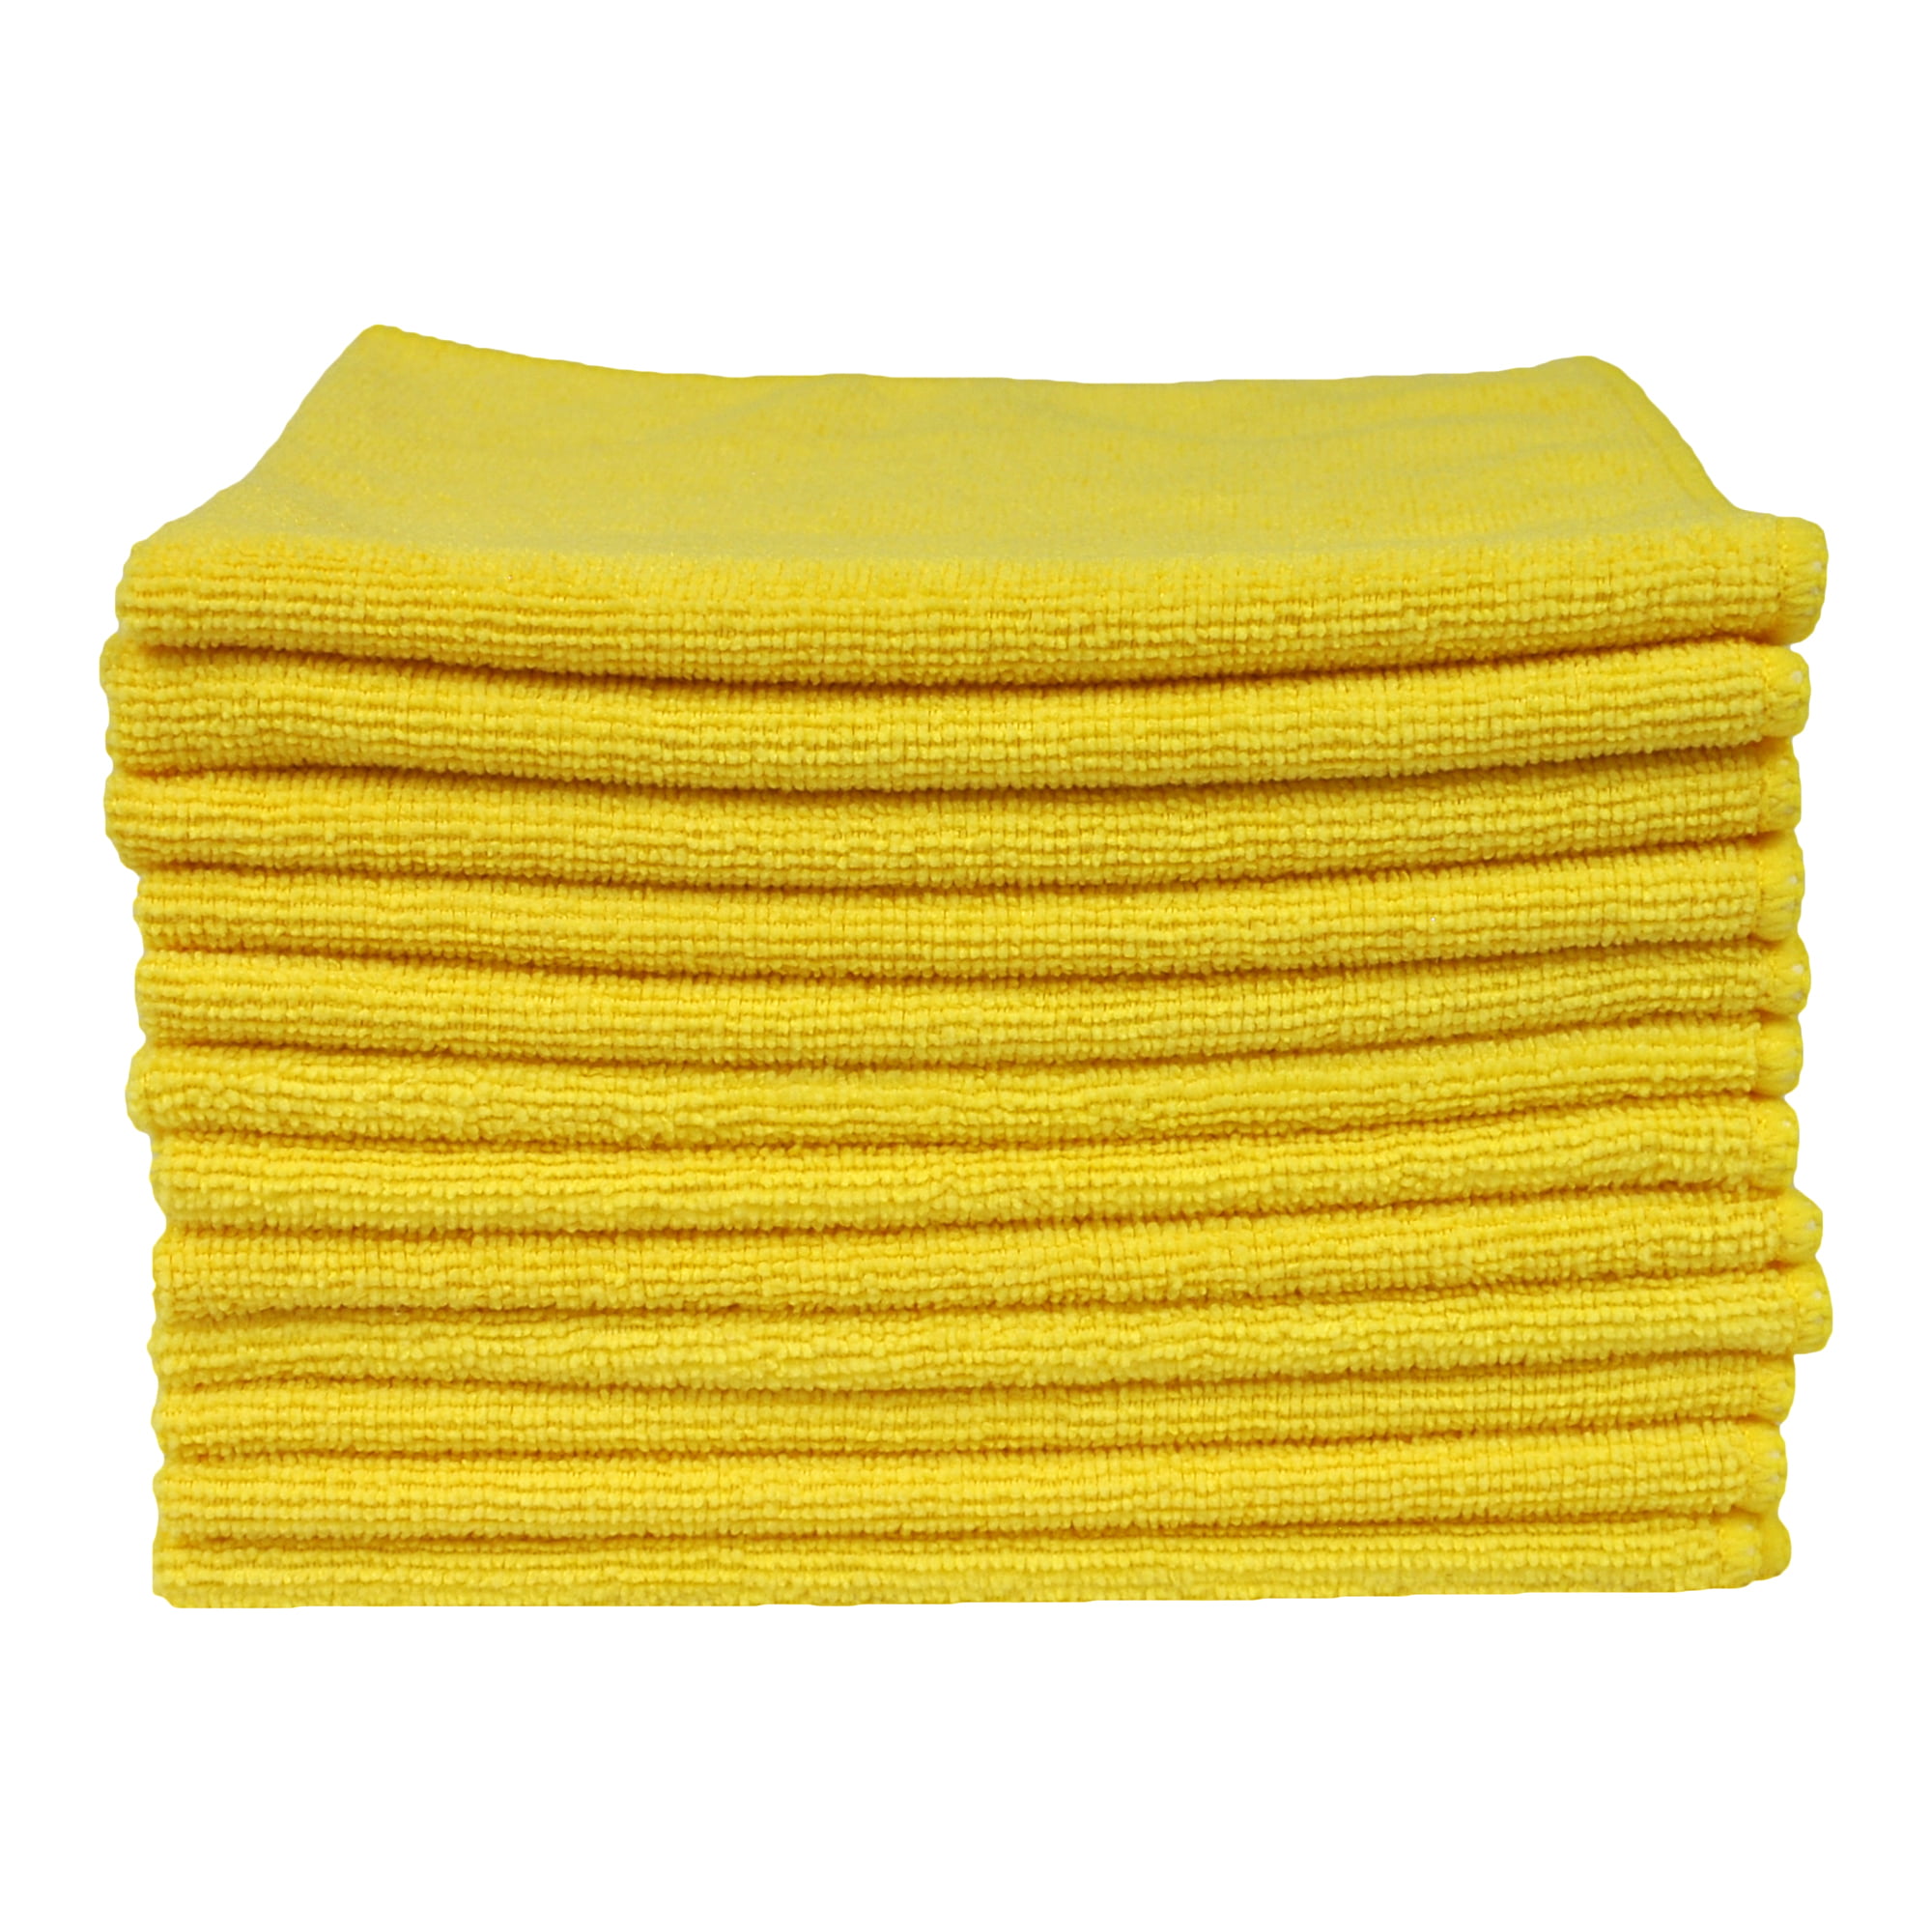 4332948844 Eurow Utility Terry Weave 16 x 16in 240 GSM Microfiber Cleaning Towels Green 12-Pack Eurow & O'Reilly Corp